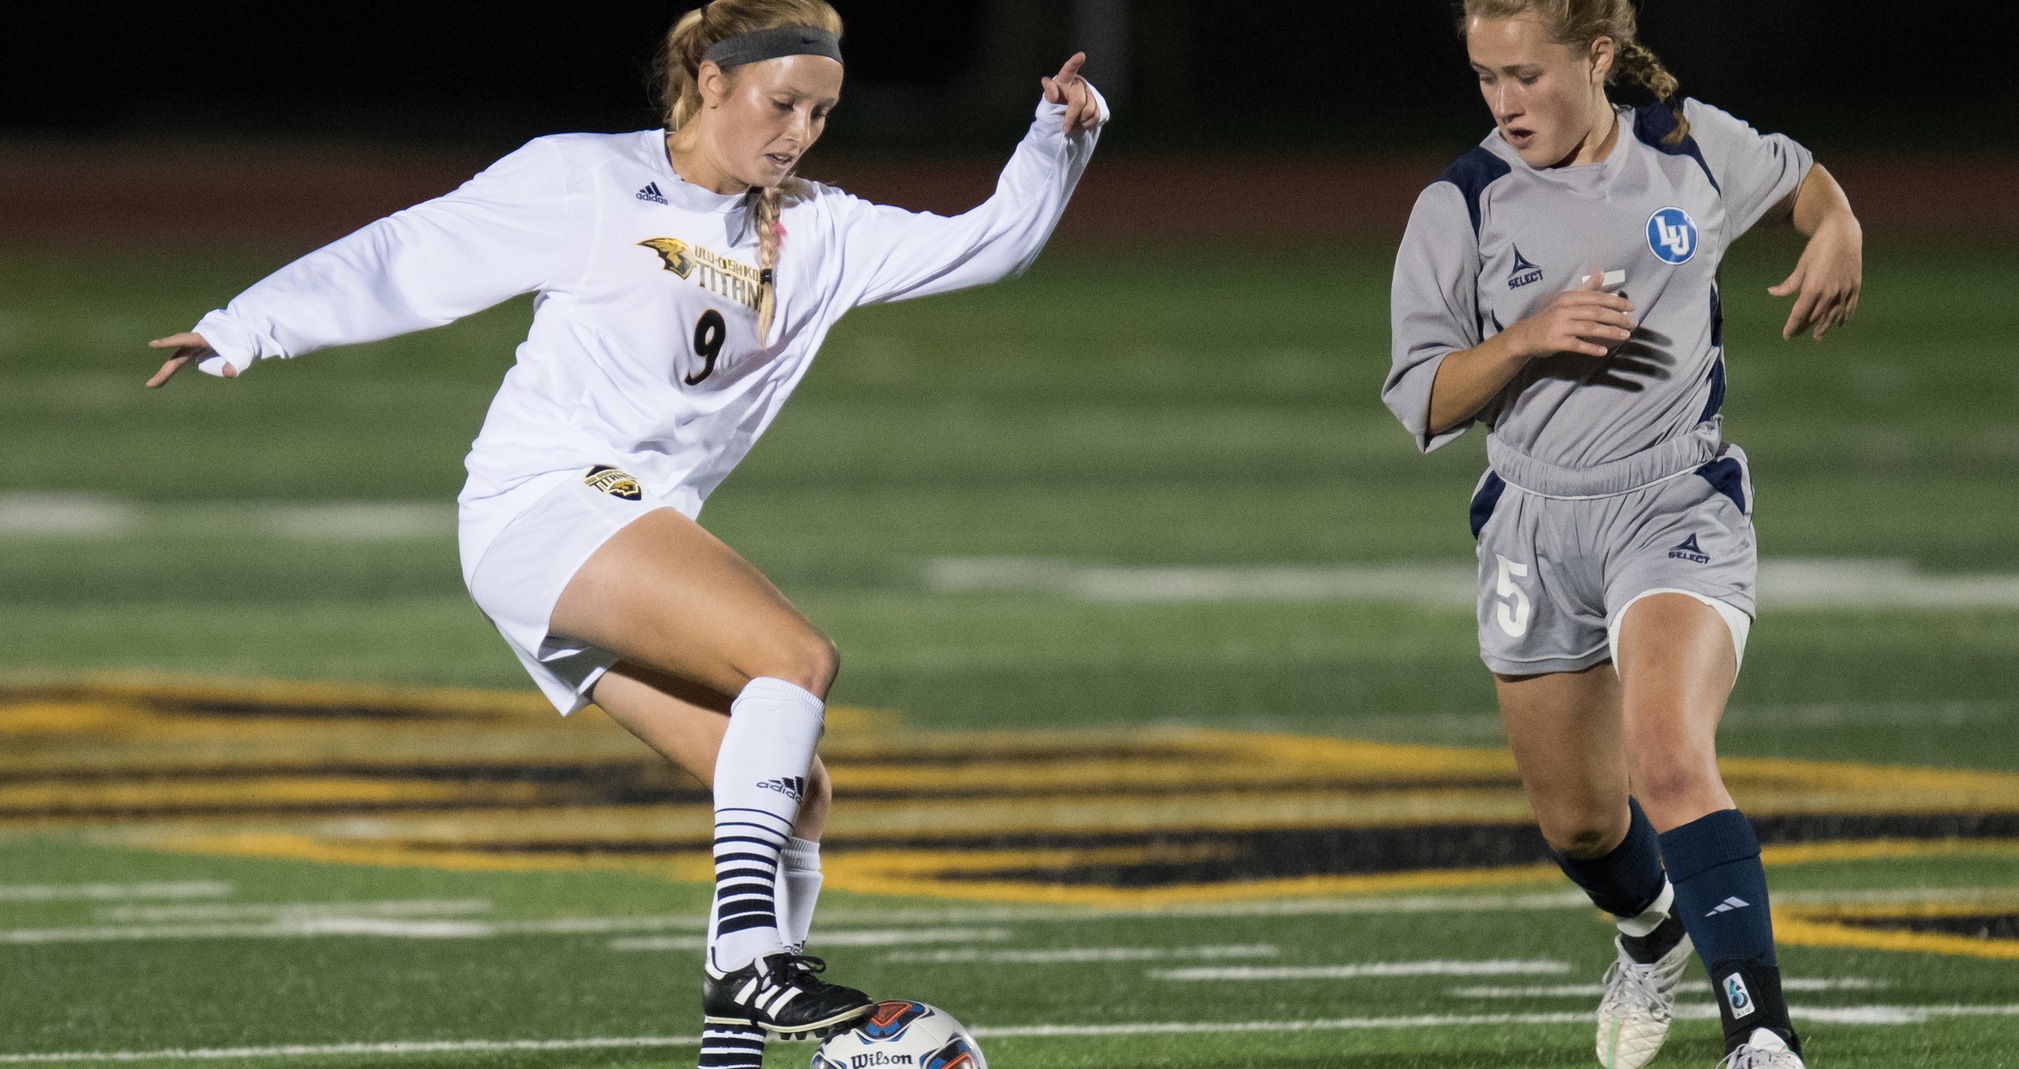 Alexis Brewer's fourth goal of the season cut UW-Oshkosh's deficit to 2-1 against the Warhawks.